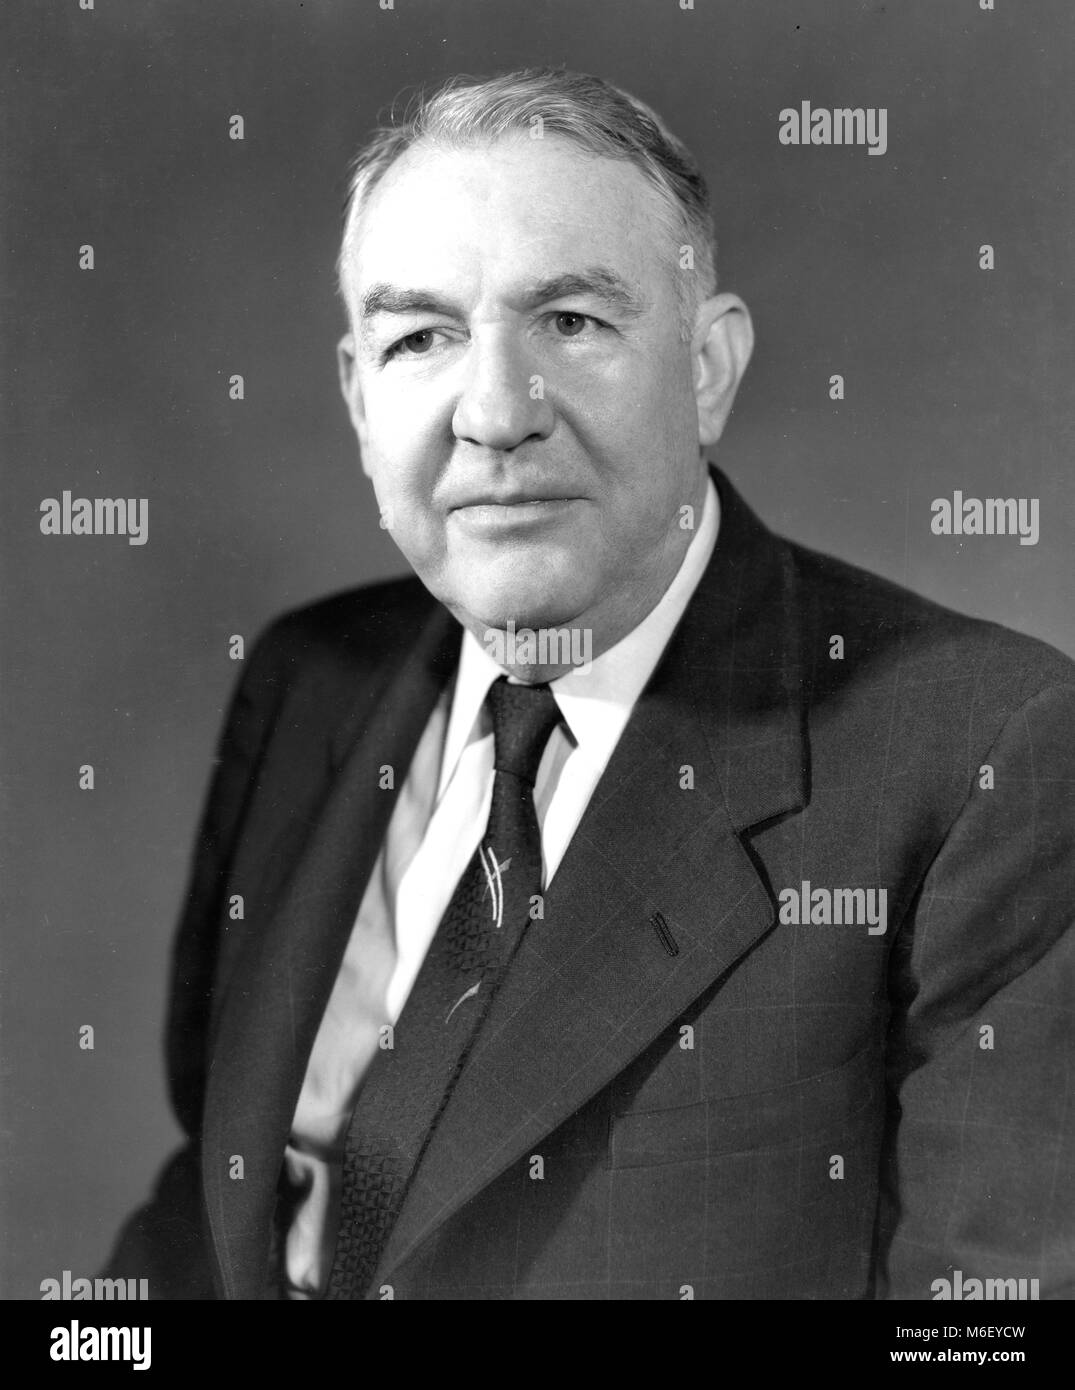 Portrait of Senator Samuel J Ervin, Jr, who was appointed to fill the unexpired term of the late Senator Clyde M Hoey of North Carolina, Washington, DC, 06/25/1954. Stock Photo